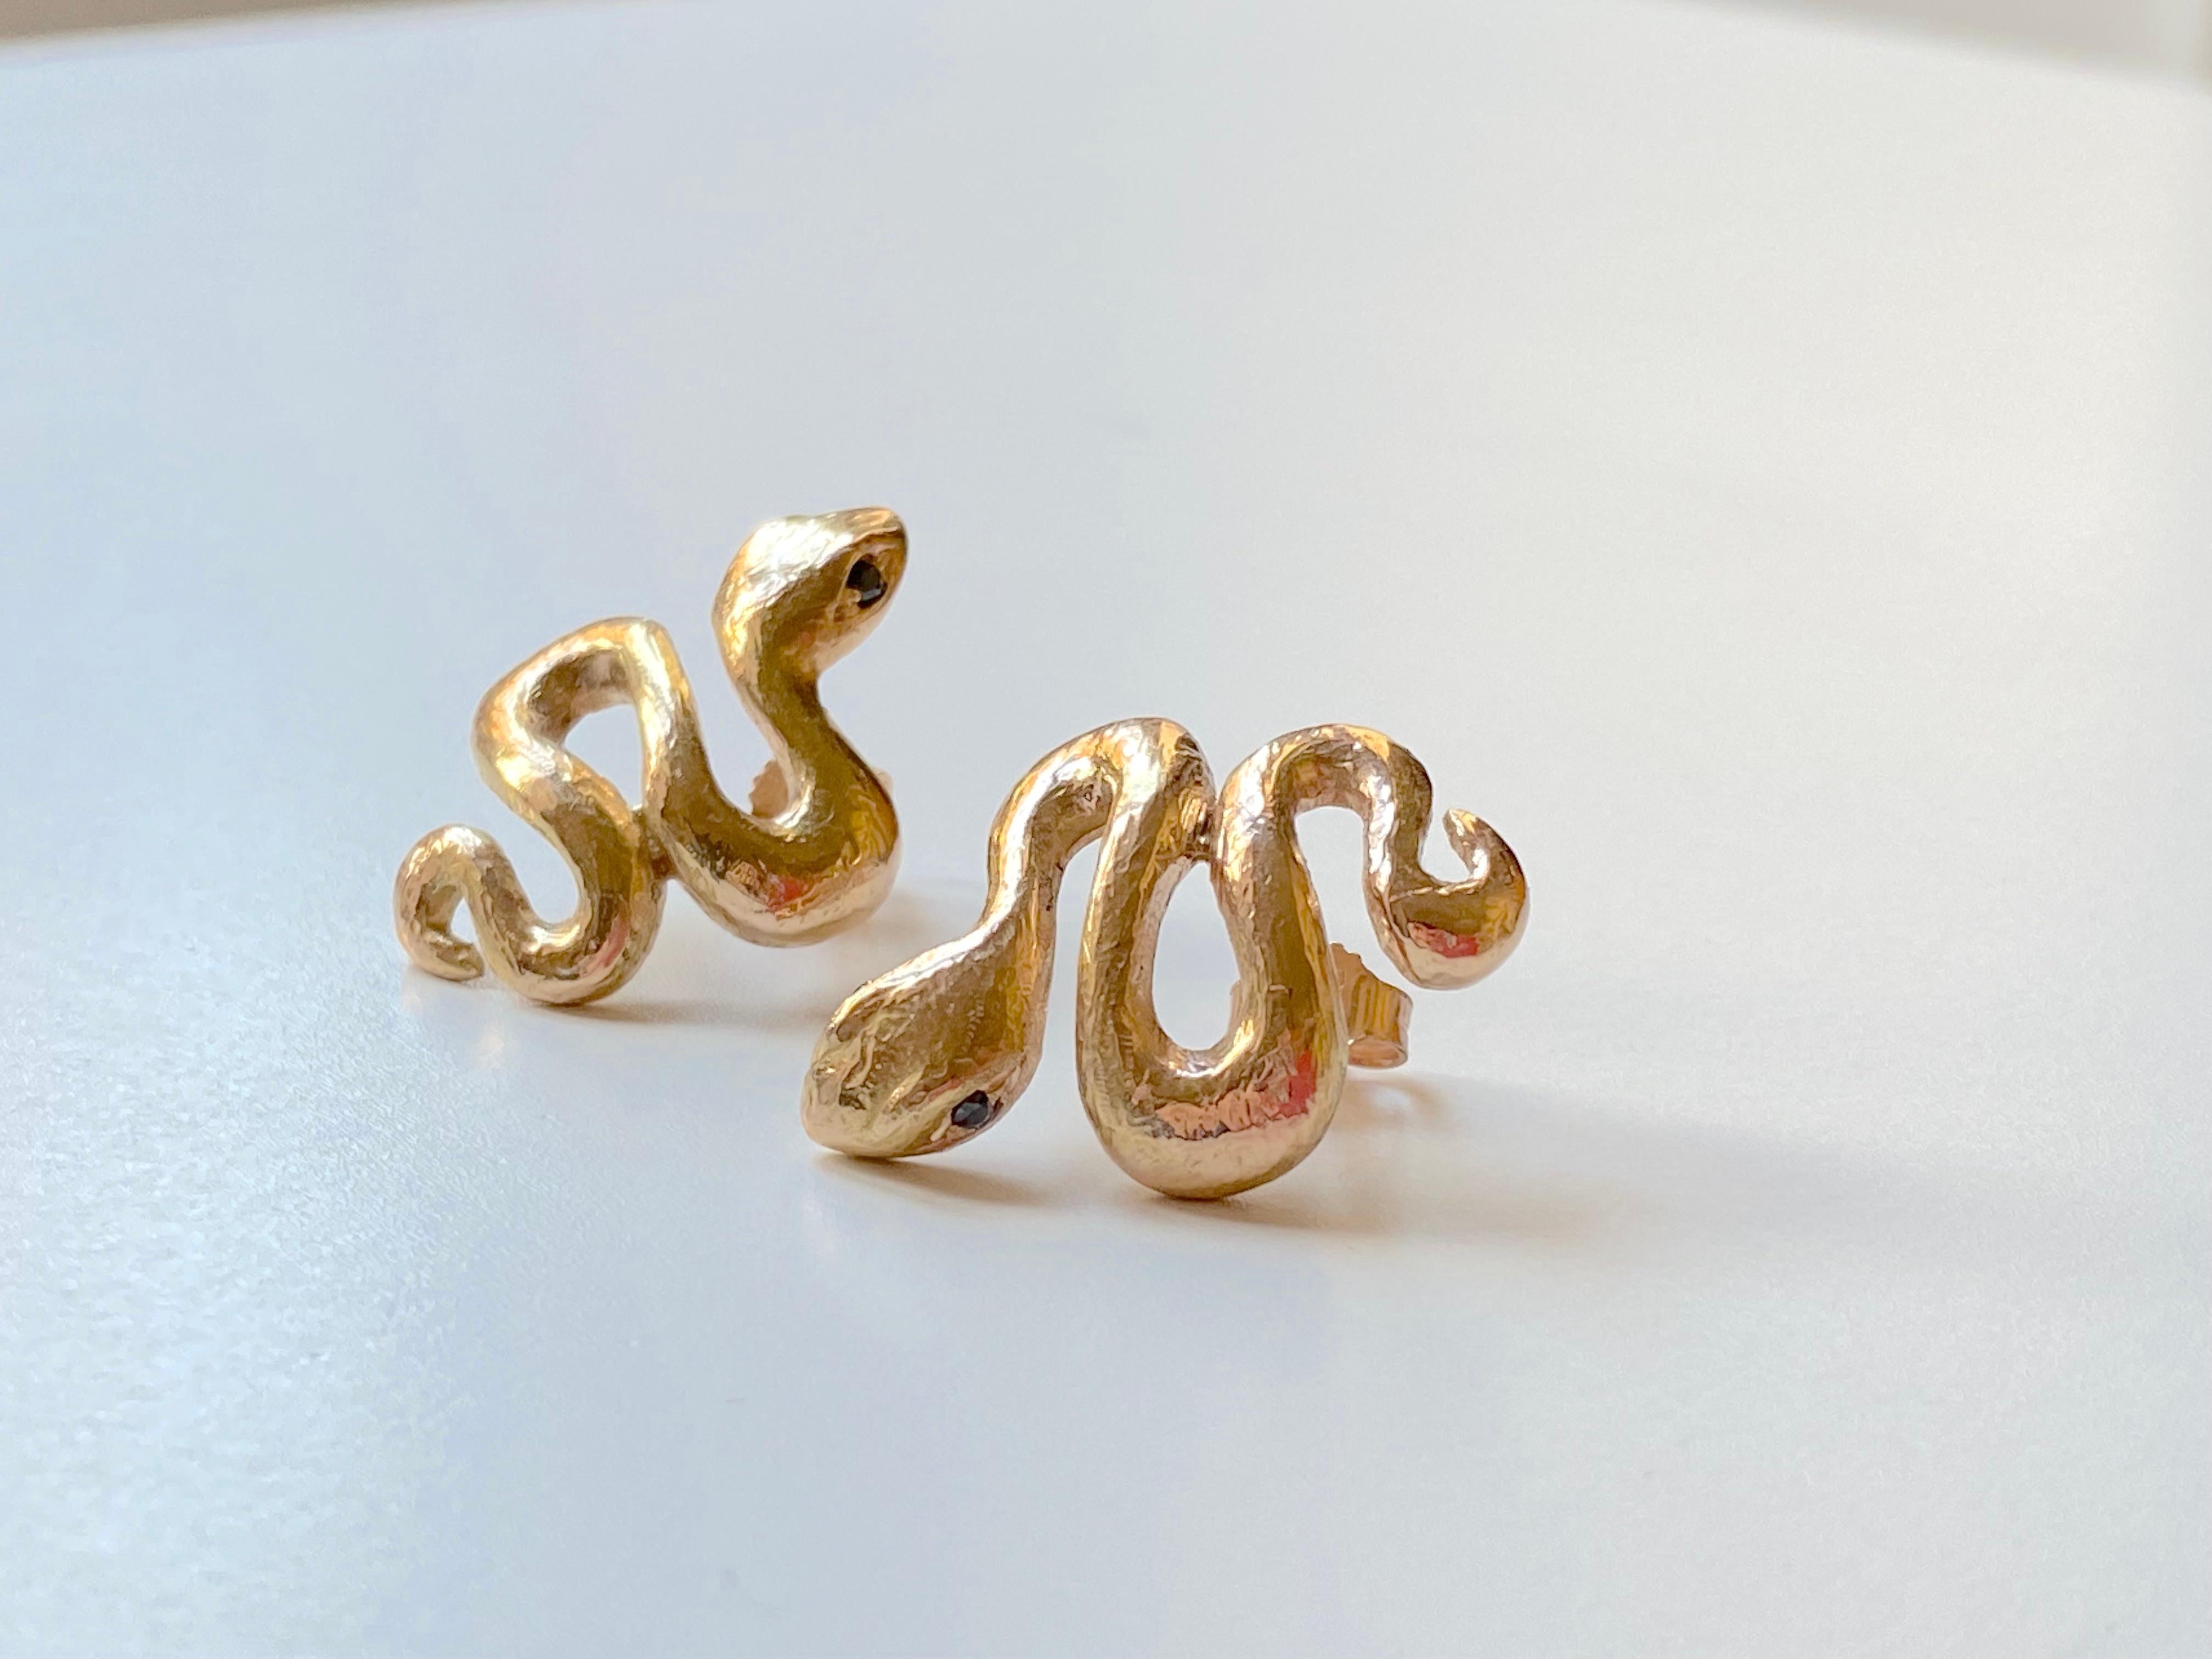 Rossella Ugolini Handcrafted 18K Hammered Yellow Gold Diamonds Stud Earrings In New Condition For Sale In Rome, IT